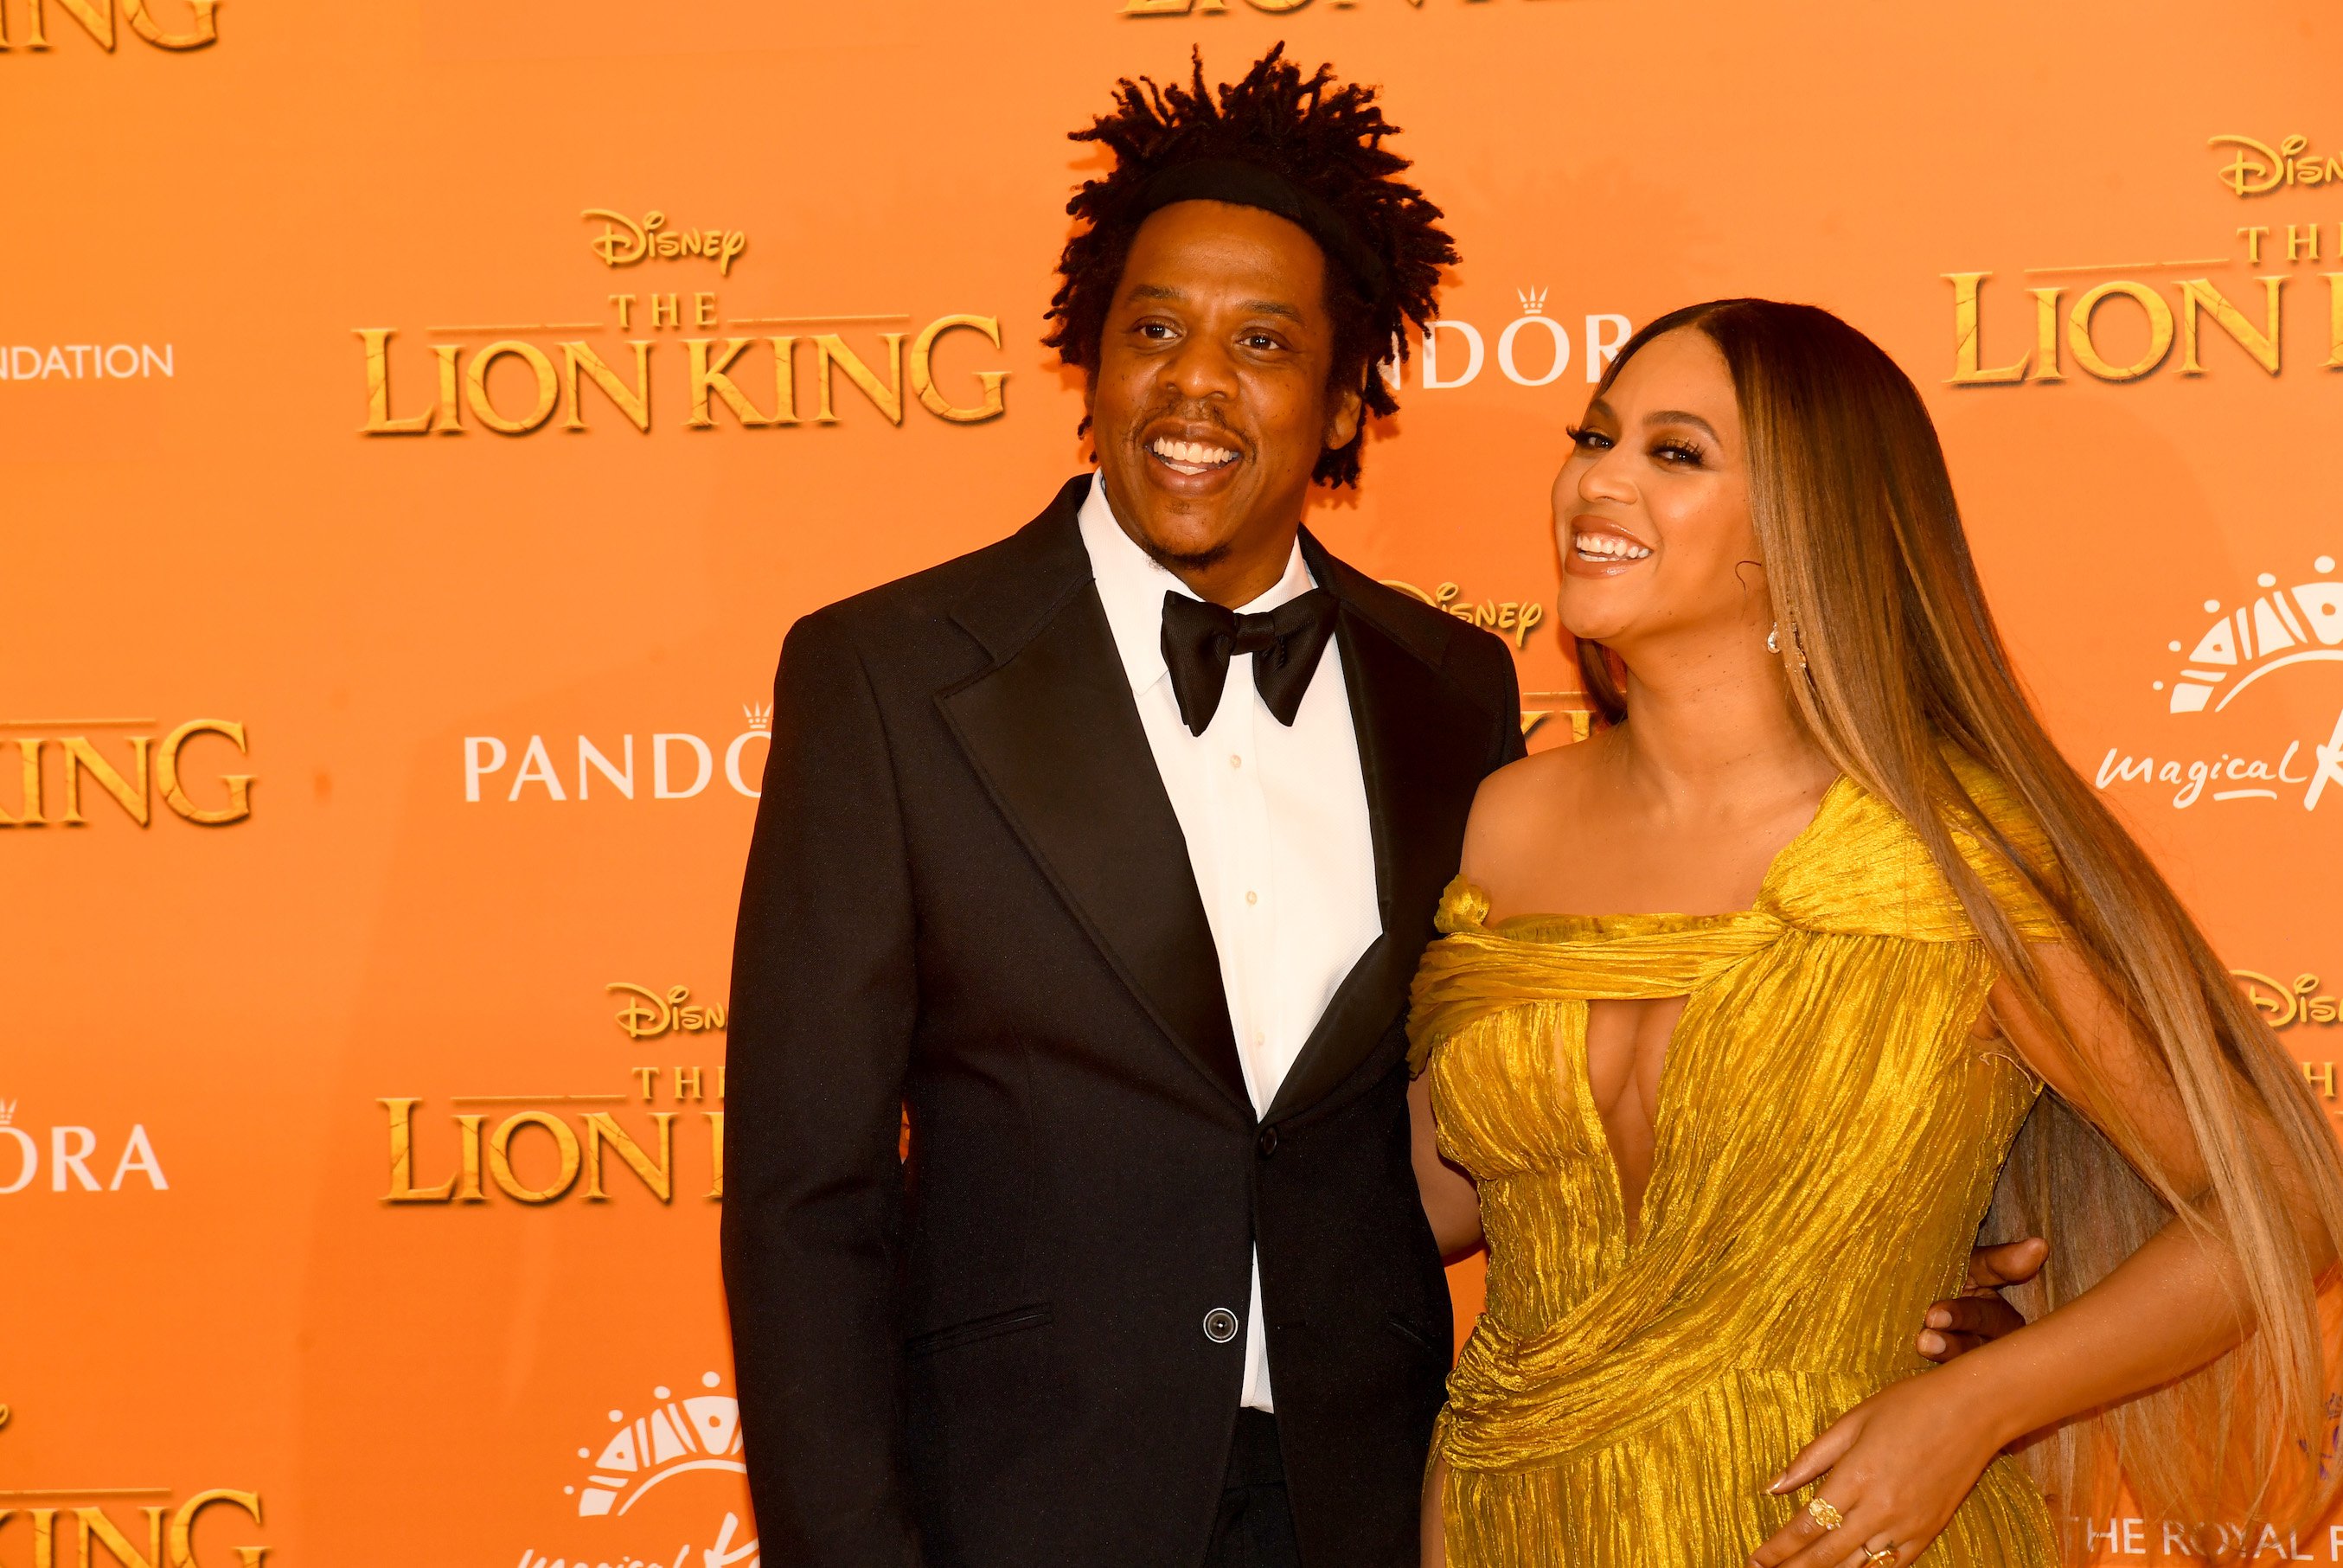 Jay-Z and Beyonce attend the European premiere of The Lion King